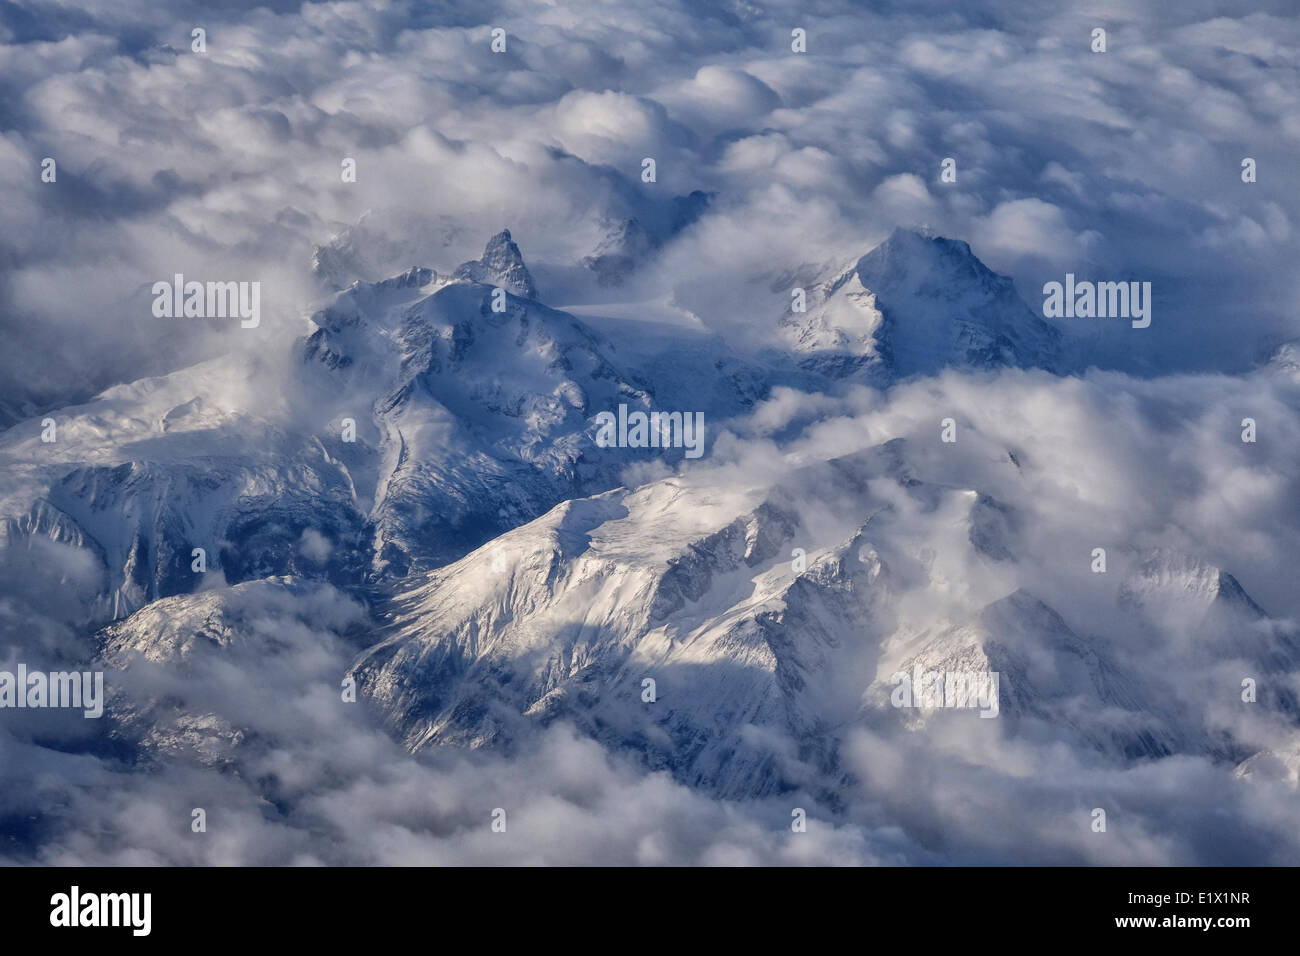 British Columbia's coast mountains seen in an aerial photo along the route between Whitehorse, Yukon and Vancouver, BC. Stock Photo